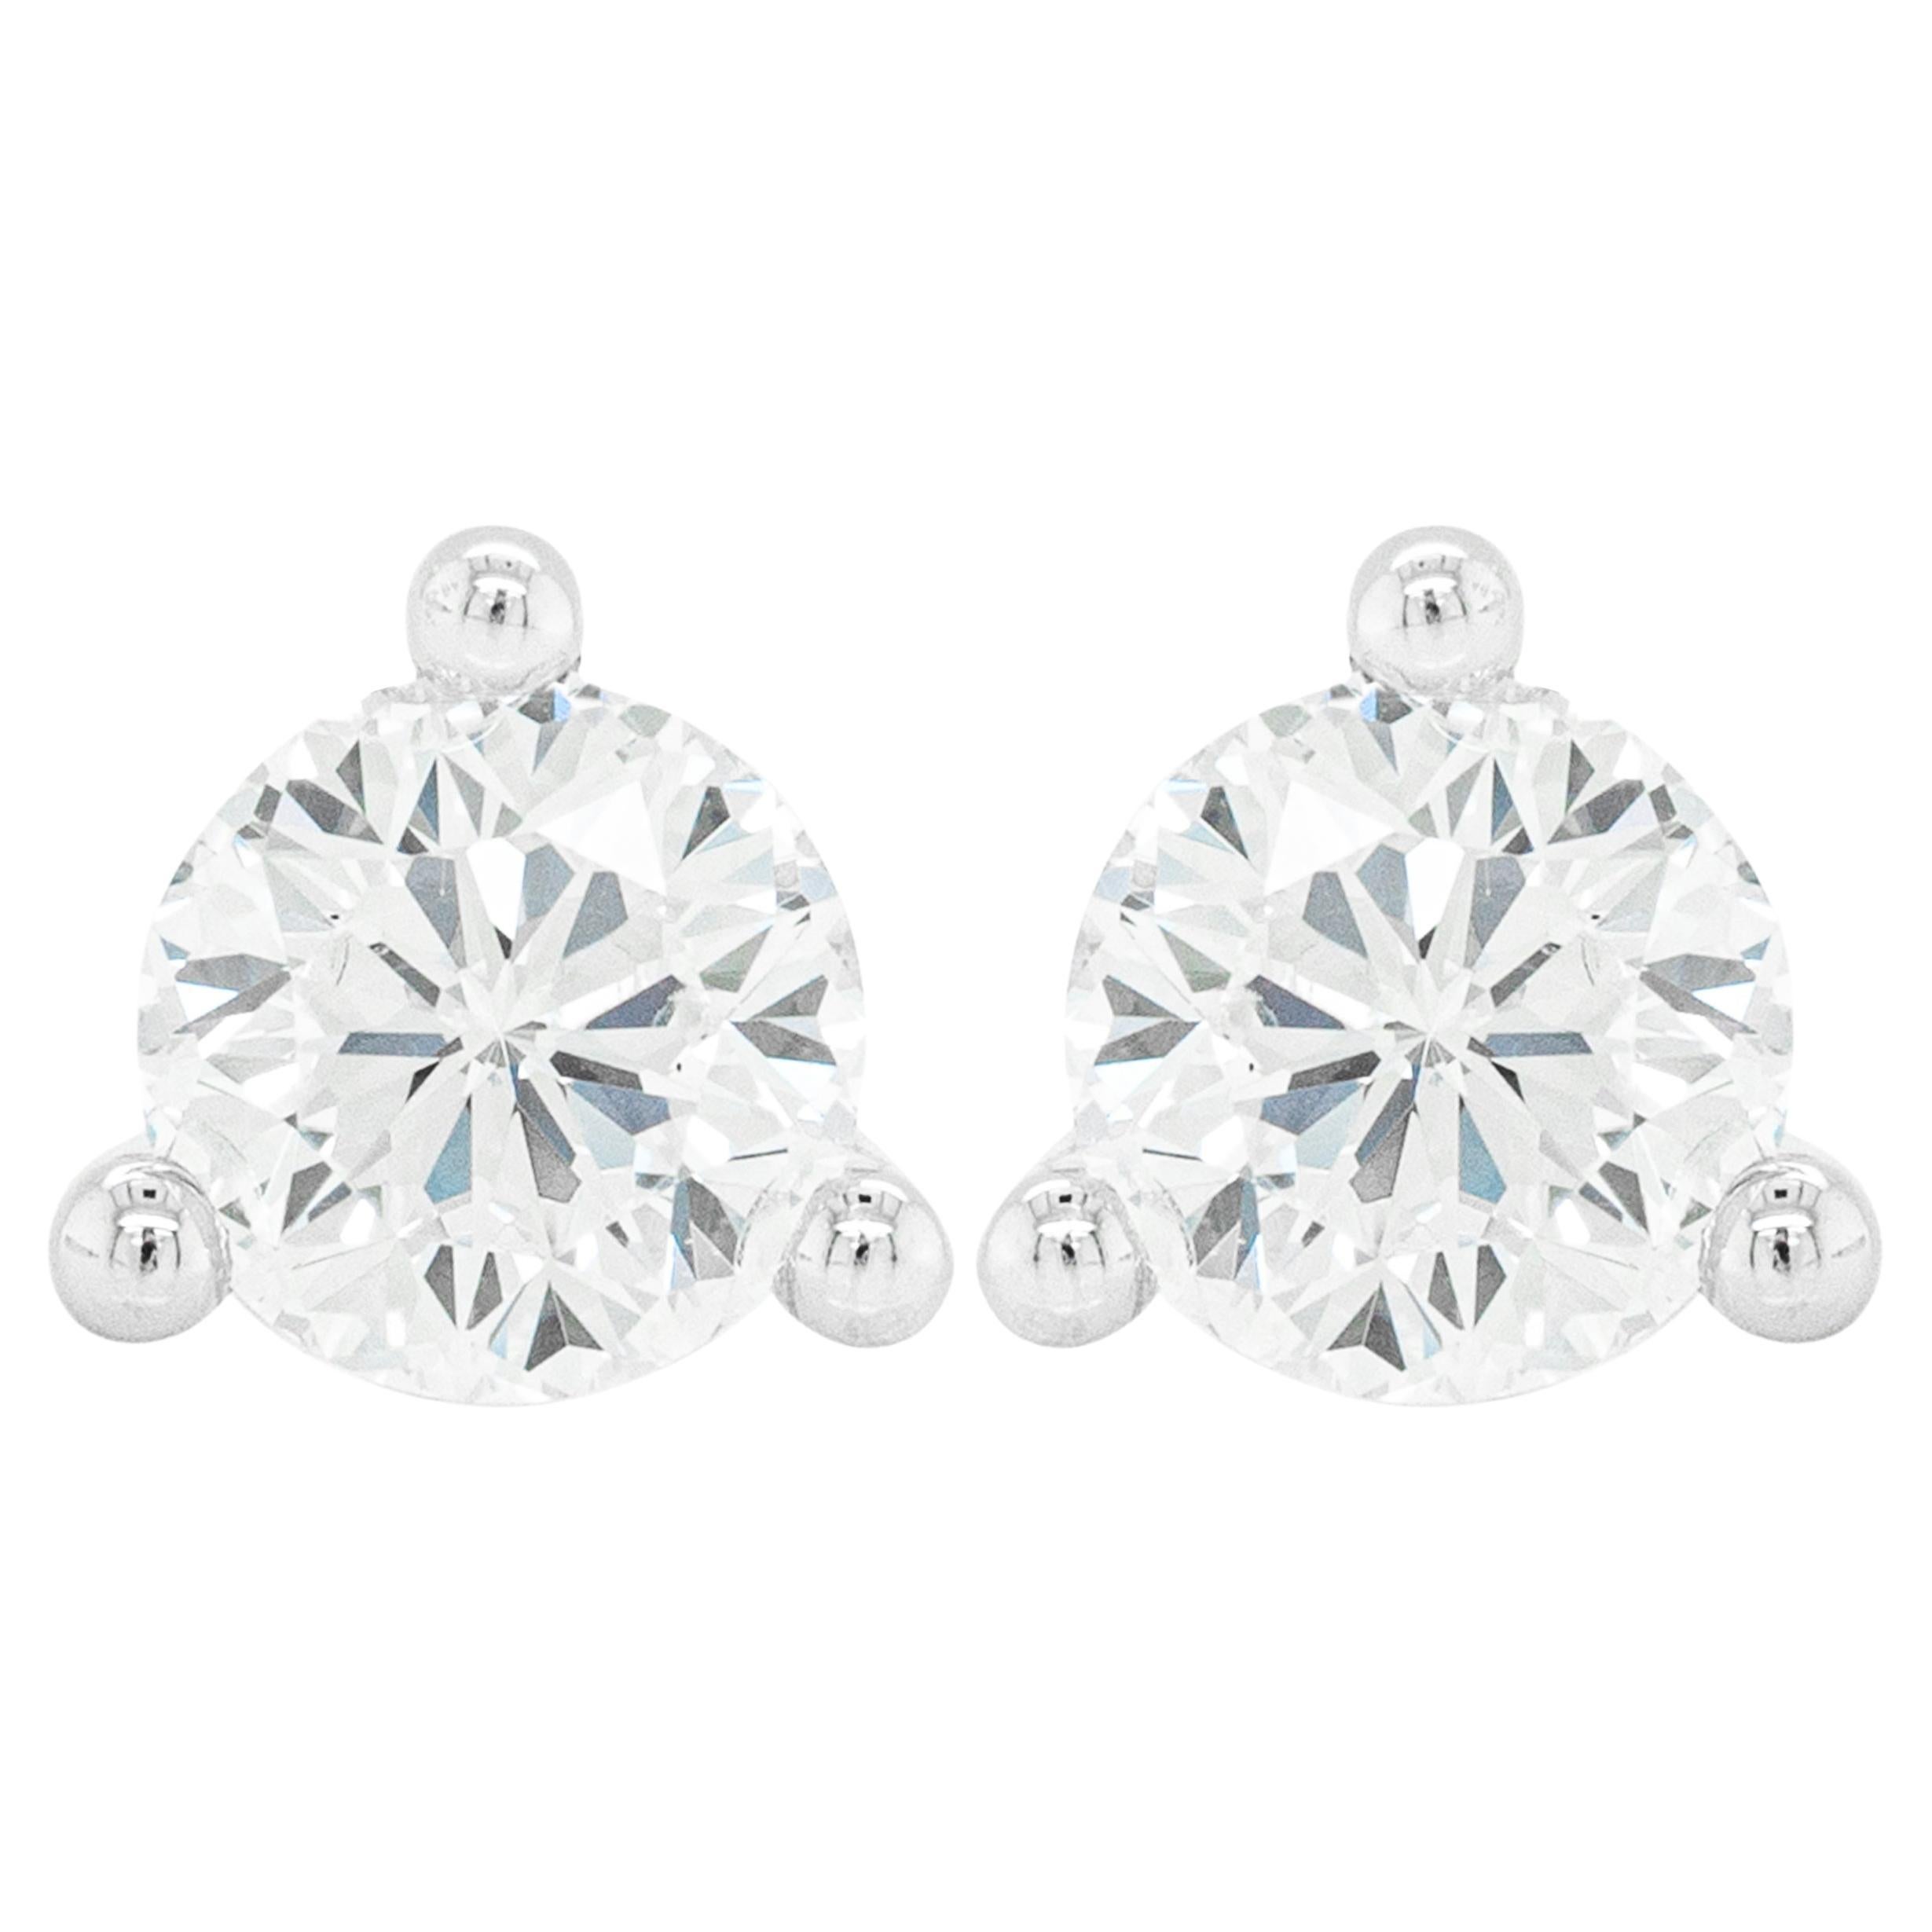 1.06ct F VS1 Roberto Coin Cento Collection Diamond 18 Carat Gold Stud Earrings